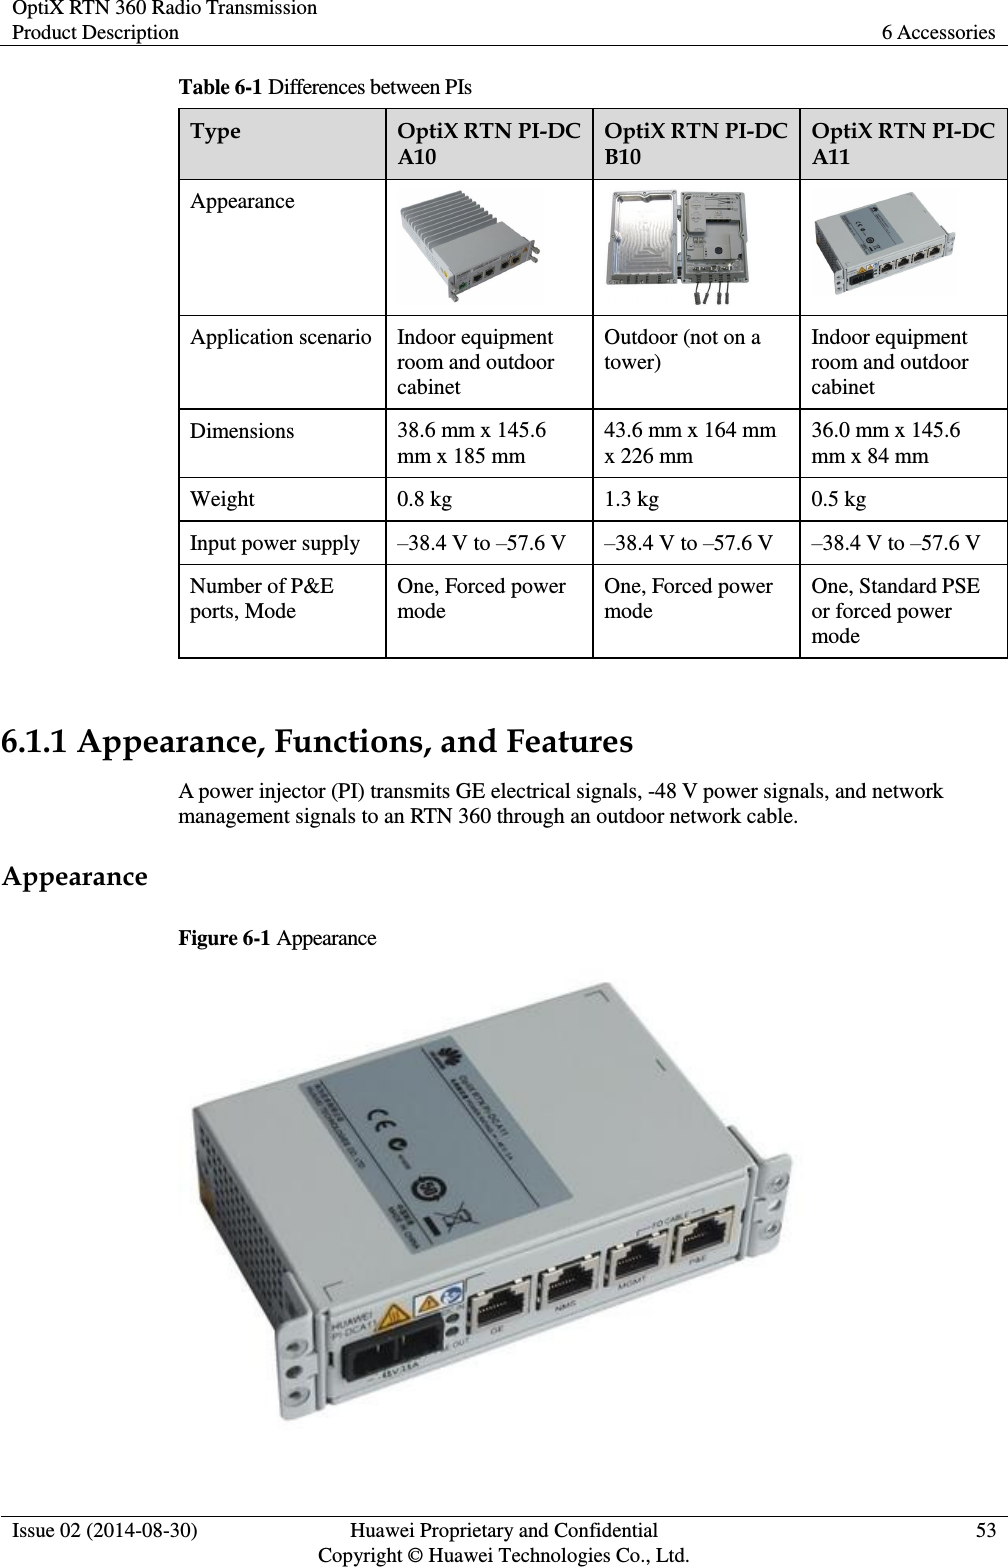 OptiX RTN 360 Radio Transmission Product Description 6 Accessories  Issue 02 (2014-08-30) Huawei Proprietary and Confidential                                     Copyright © Huawei Technologies Co., Ltd. 53  Table 6-1 Differences between PIs Type OptiX RTN PI-DC A10 OptiX RTN PI-DC B10 OptiX RTN PI-DC A11 Appearance    Application scenario Indoor equipment room and outdoor cabinet Outdoor (not on a tower) Indoor equipment room and outdoor cabinet Dimensions 38.6 mm x 145.6 mm x 185 mm 43.6 mm x 164 mm x 226 mm 36.0 mm x 145.6 mm x 84 mm Weight 0.8 kg 1.3 kg 0.5 kg Input power supply –38.4 V to –57.6 V –38.4 V to –57.6 V –38.4 V to –57.6 V Number of P&amp;E ports, Mode One, Forced power mode One, Forced power mode One, Standard PSE or forced power mode  6.1.1 Appearance, Functions, and Features A power injector (PI) transmits GE electrical signals, -48 V power signals, and network management signals to an RTN 360 through an outdoor network cable. Appearance Figure 6-1 Appearance   